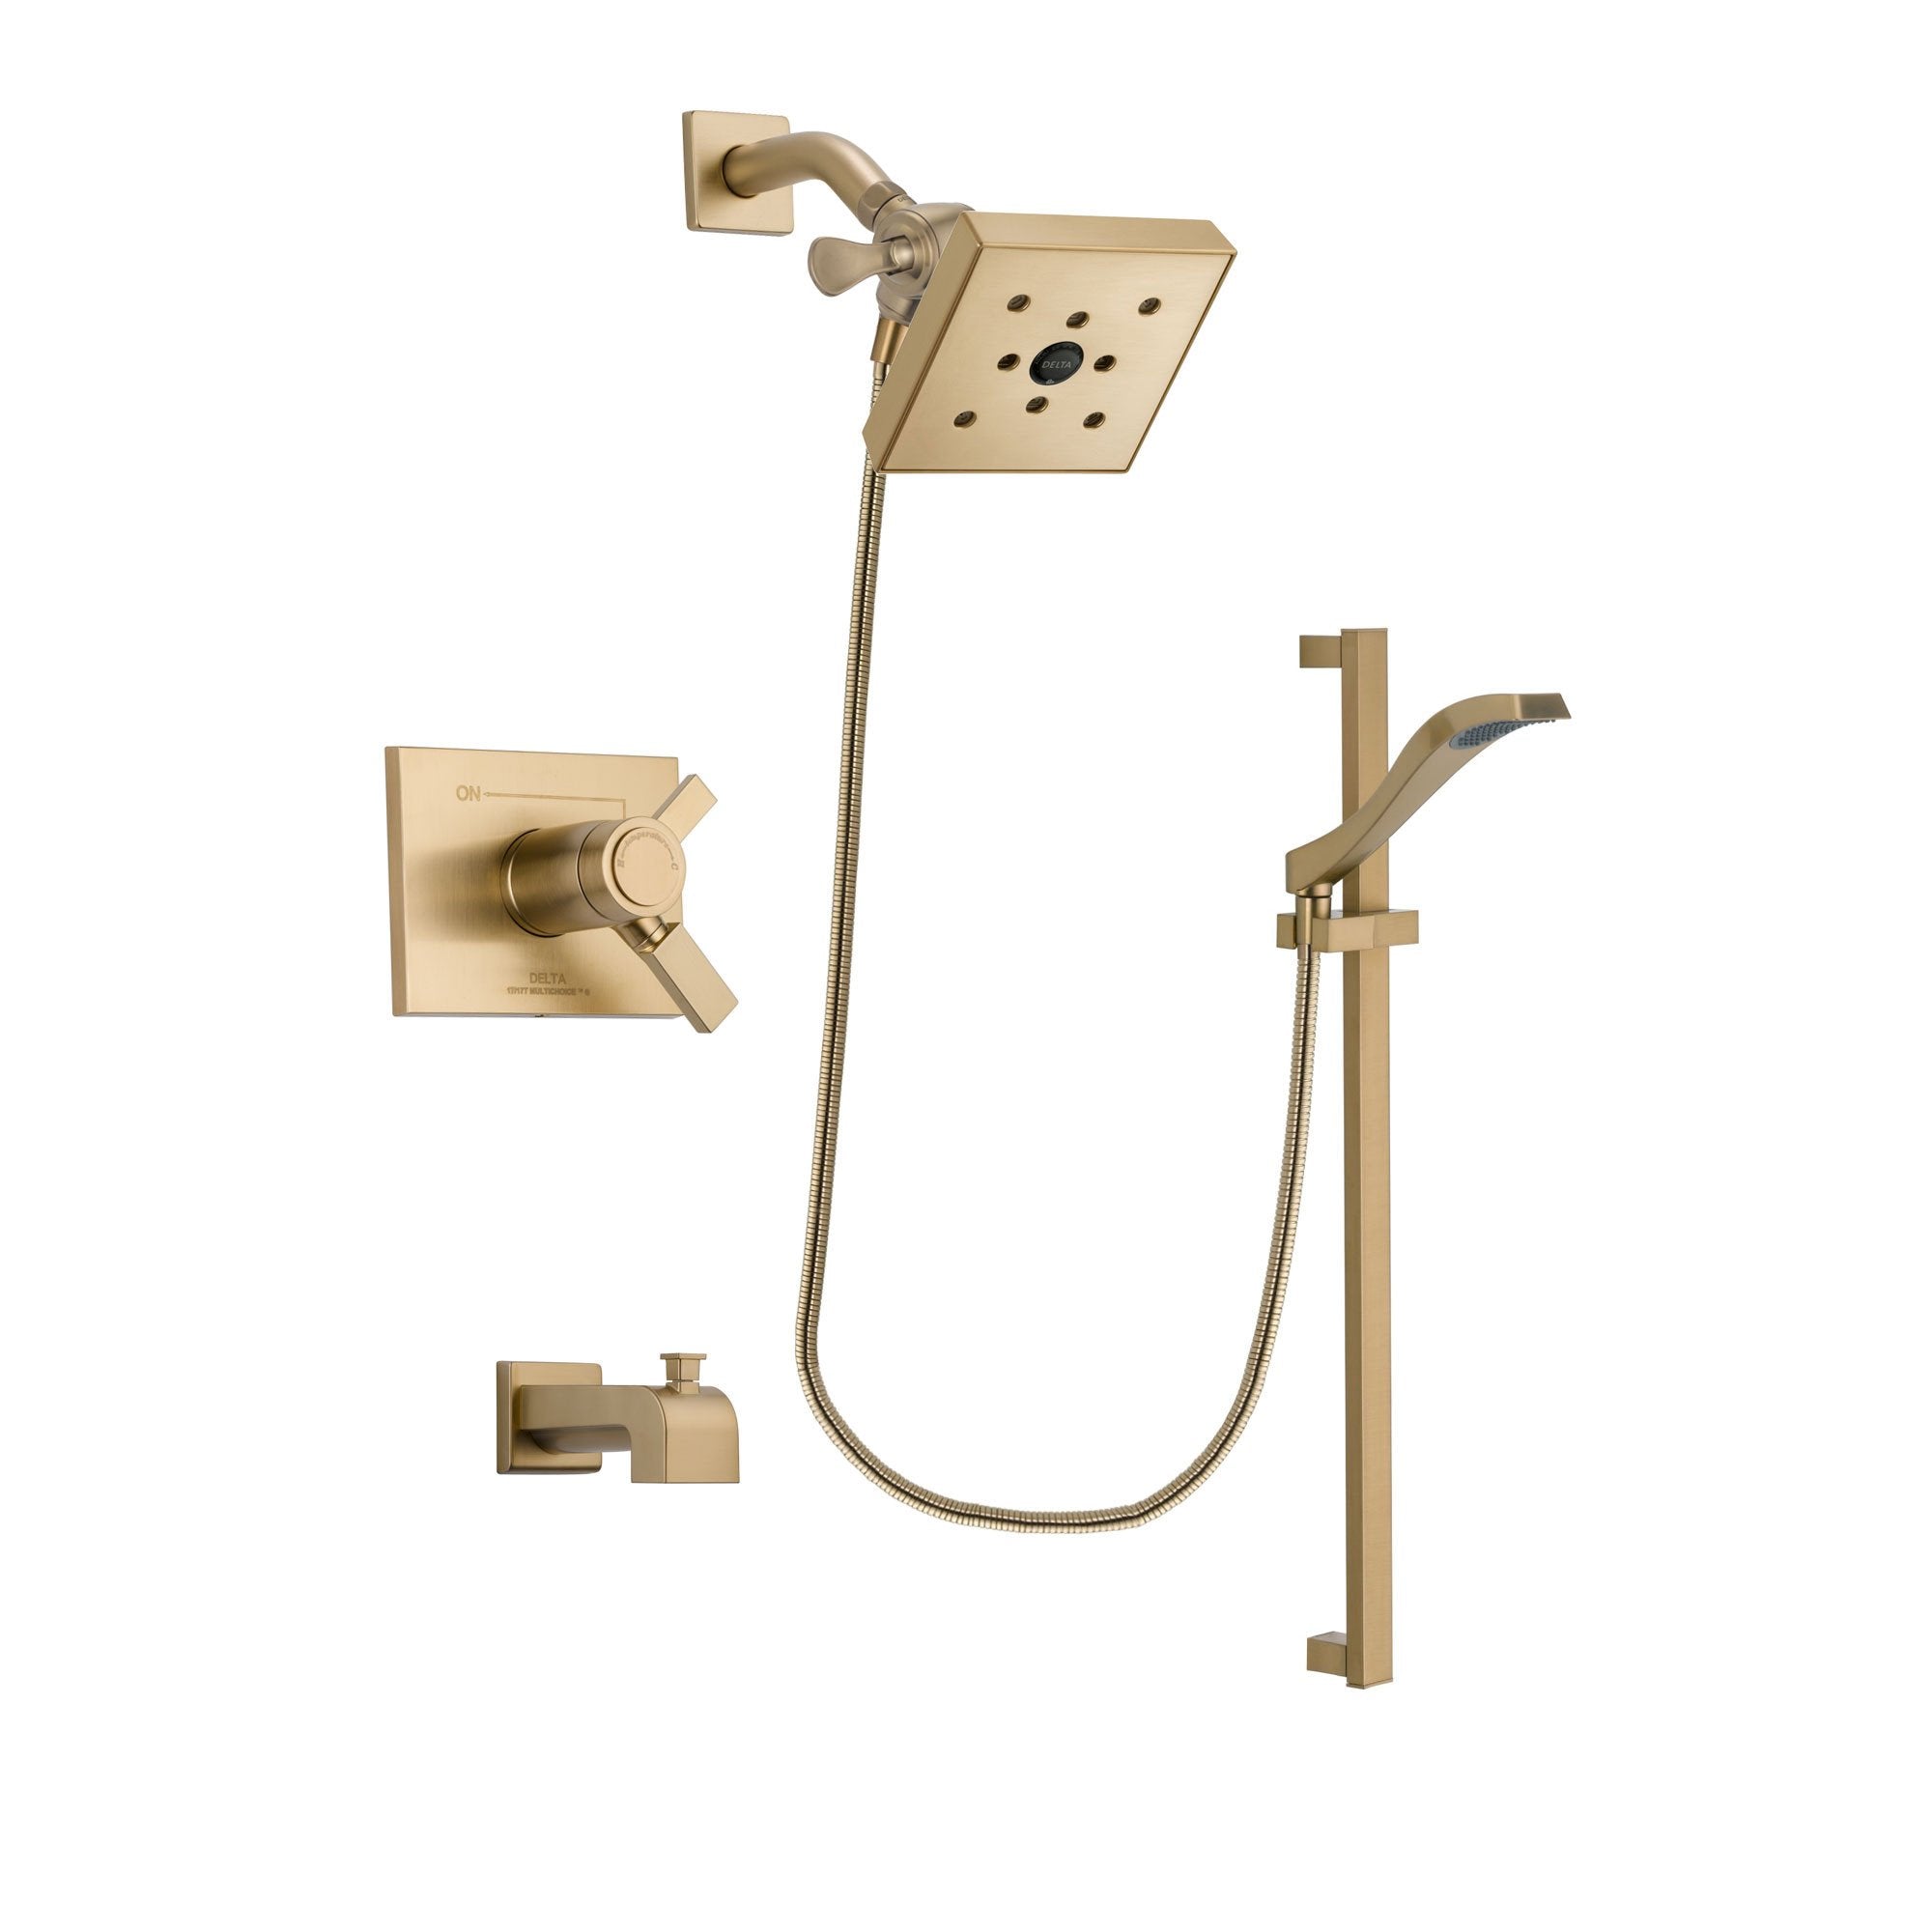 Delta Vero Champagne Bronze Finish Thermostatic Tub and Shower Faucet System Package with Square Shower Head and Modern Handheld Shower Spray with Slide Bar Includes Rough-in Valve and Tub Spout DSP3935V